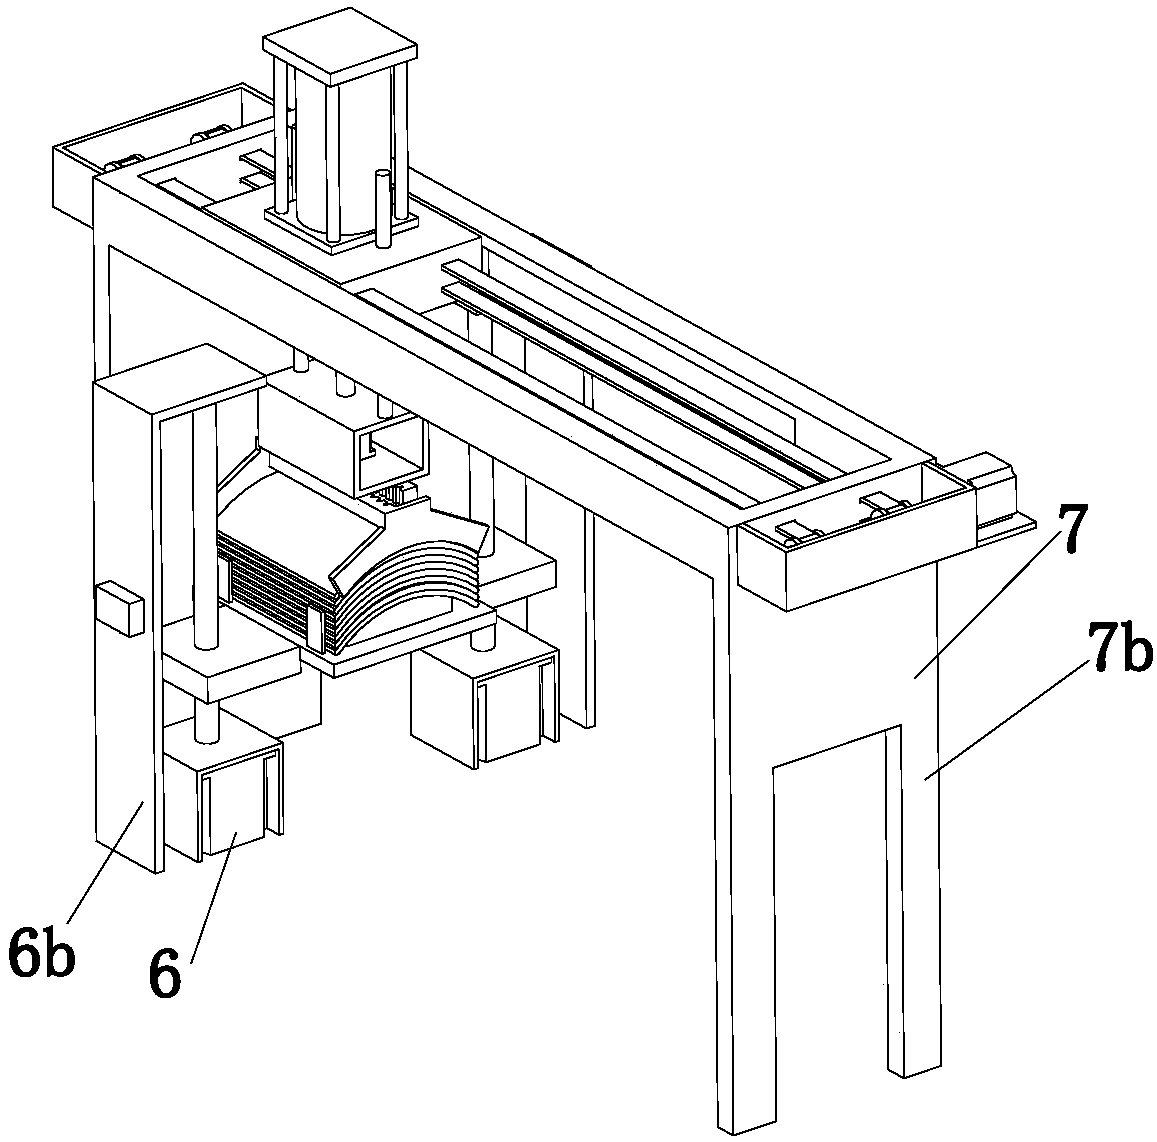 Charging mechanism of automatic magnetic shoe deburring device